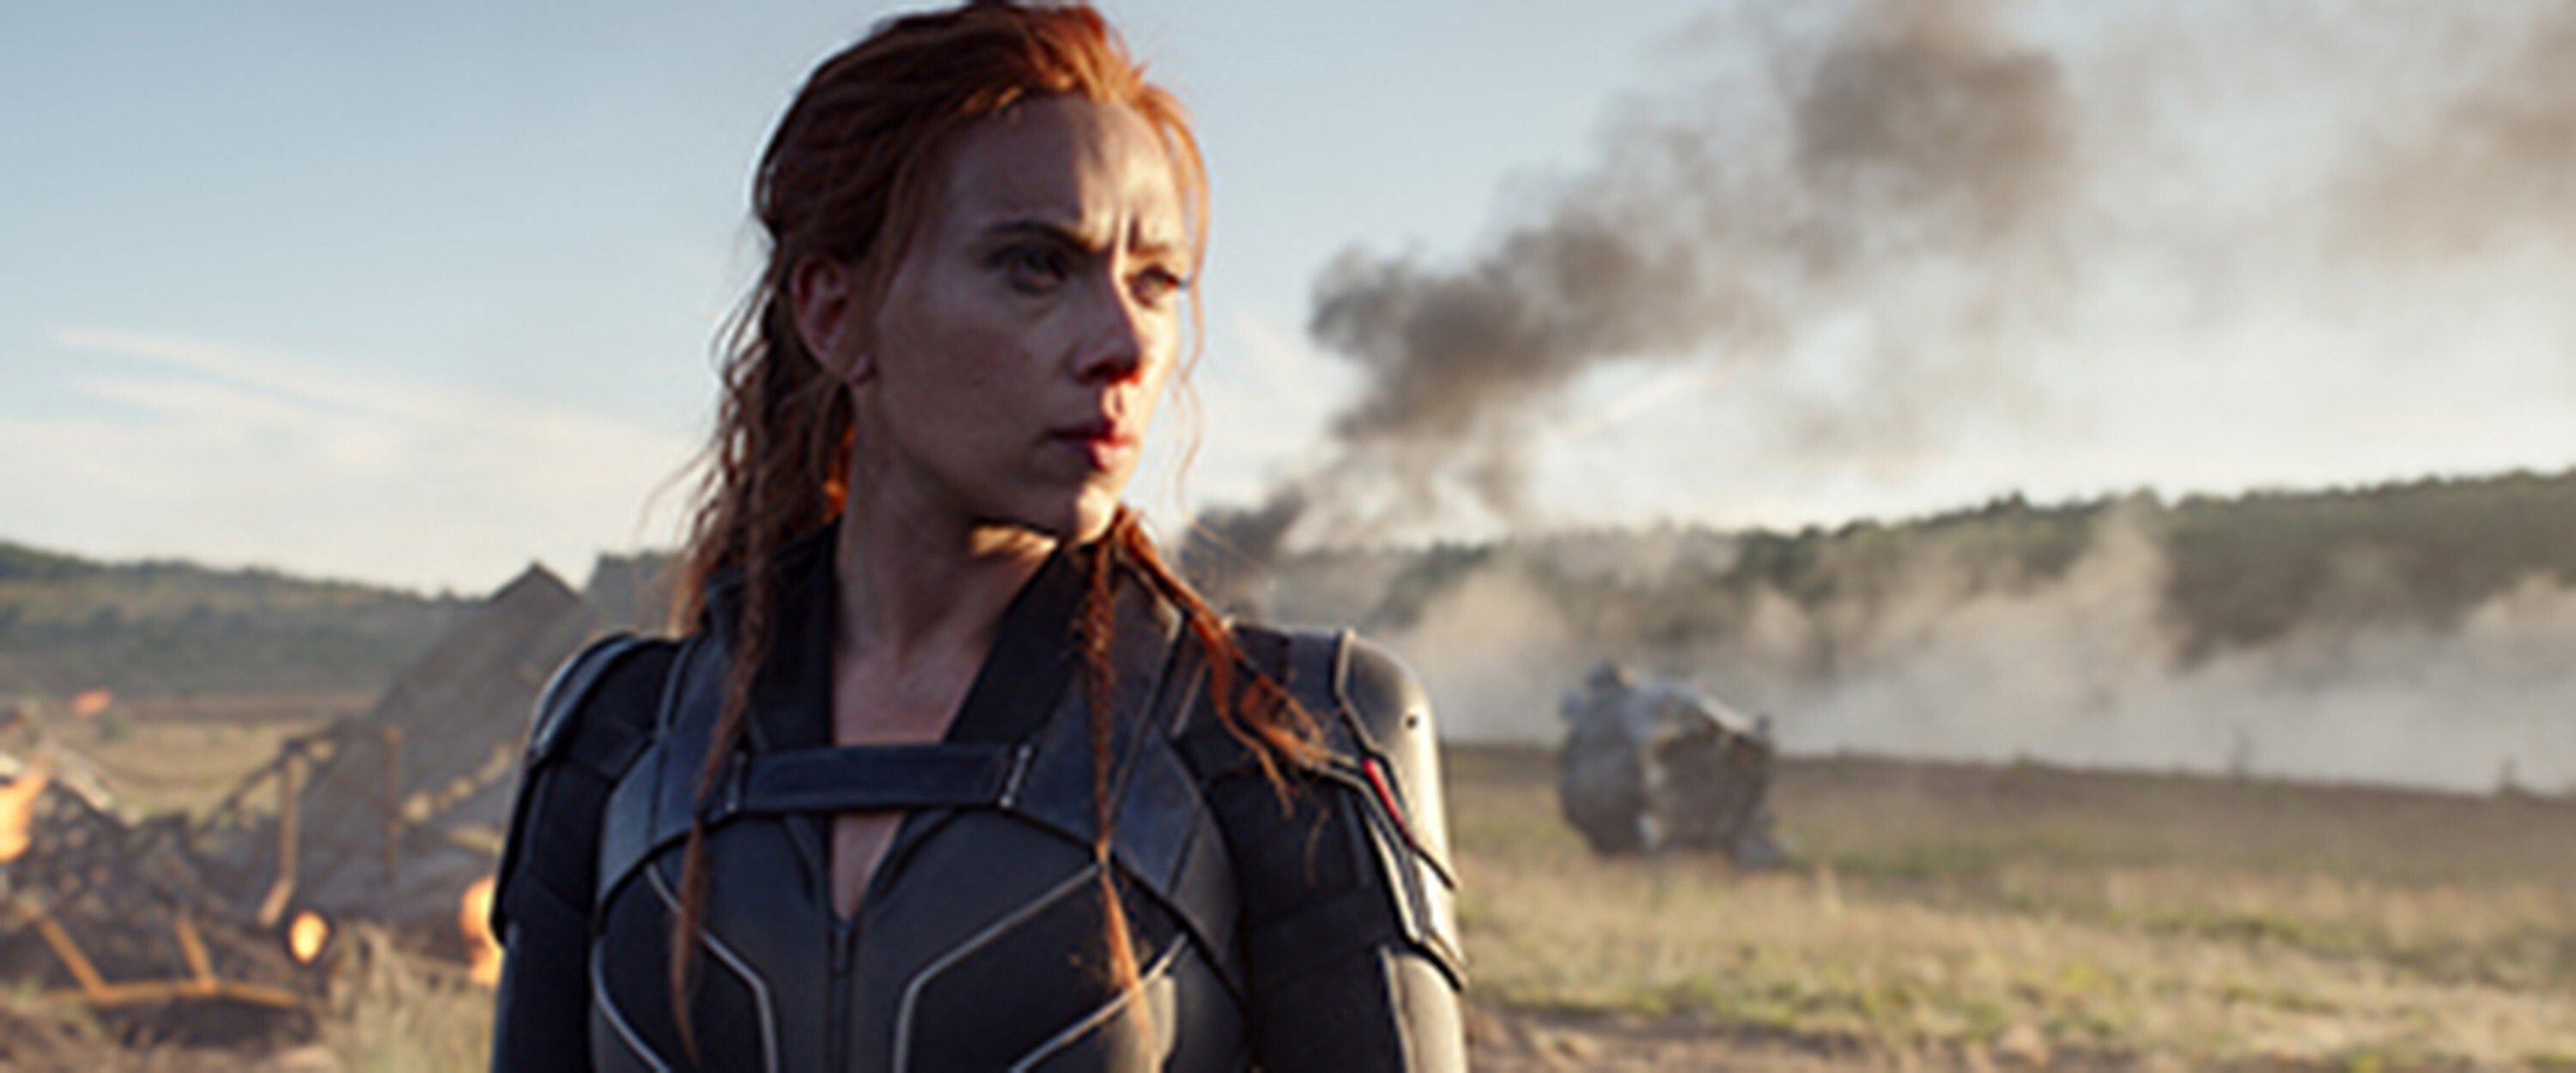 No looking back: Black Widow is just the start of the MCU’s Phase 4. Photo: Marvel Studios/TNS)